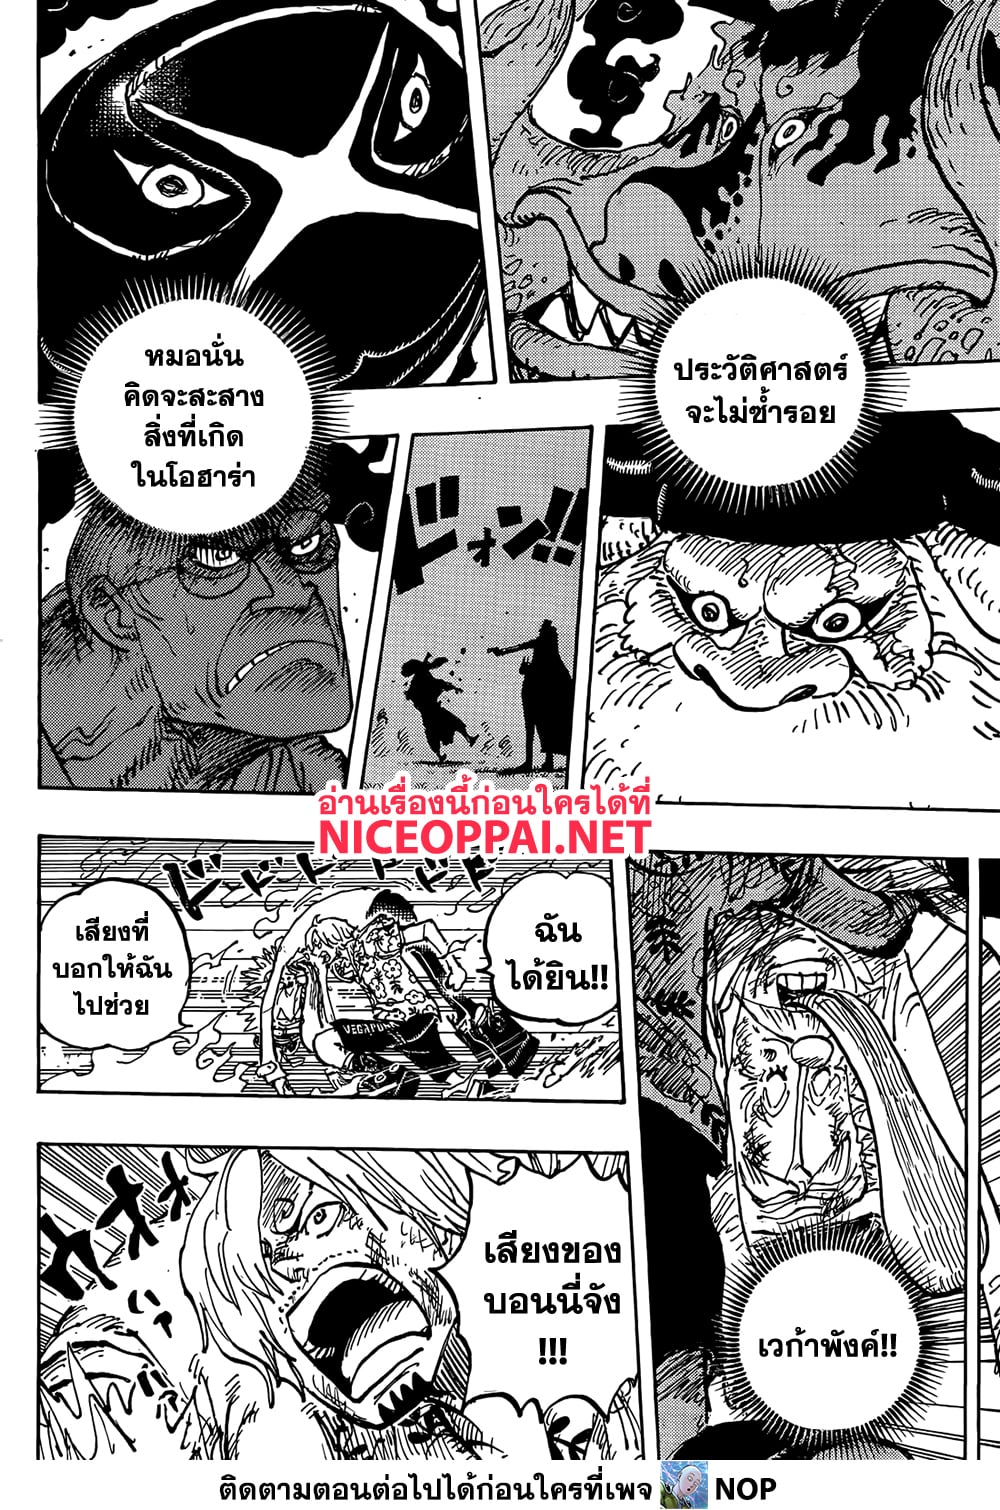 One Piece 1113-STALEMATE